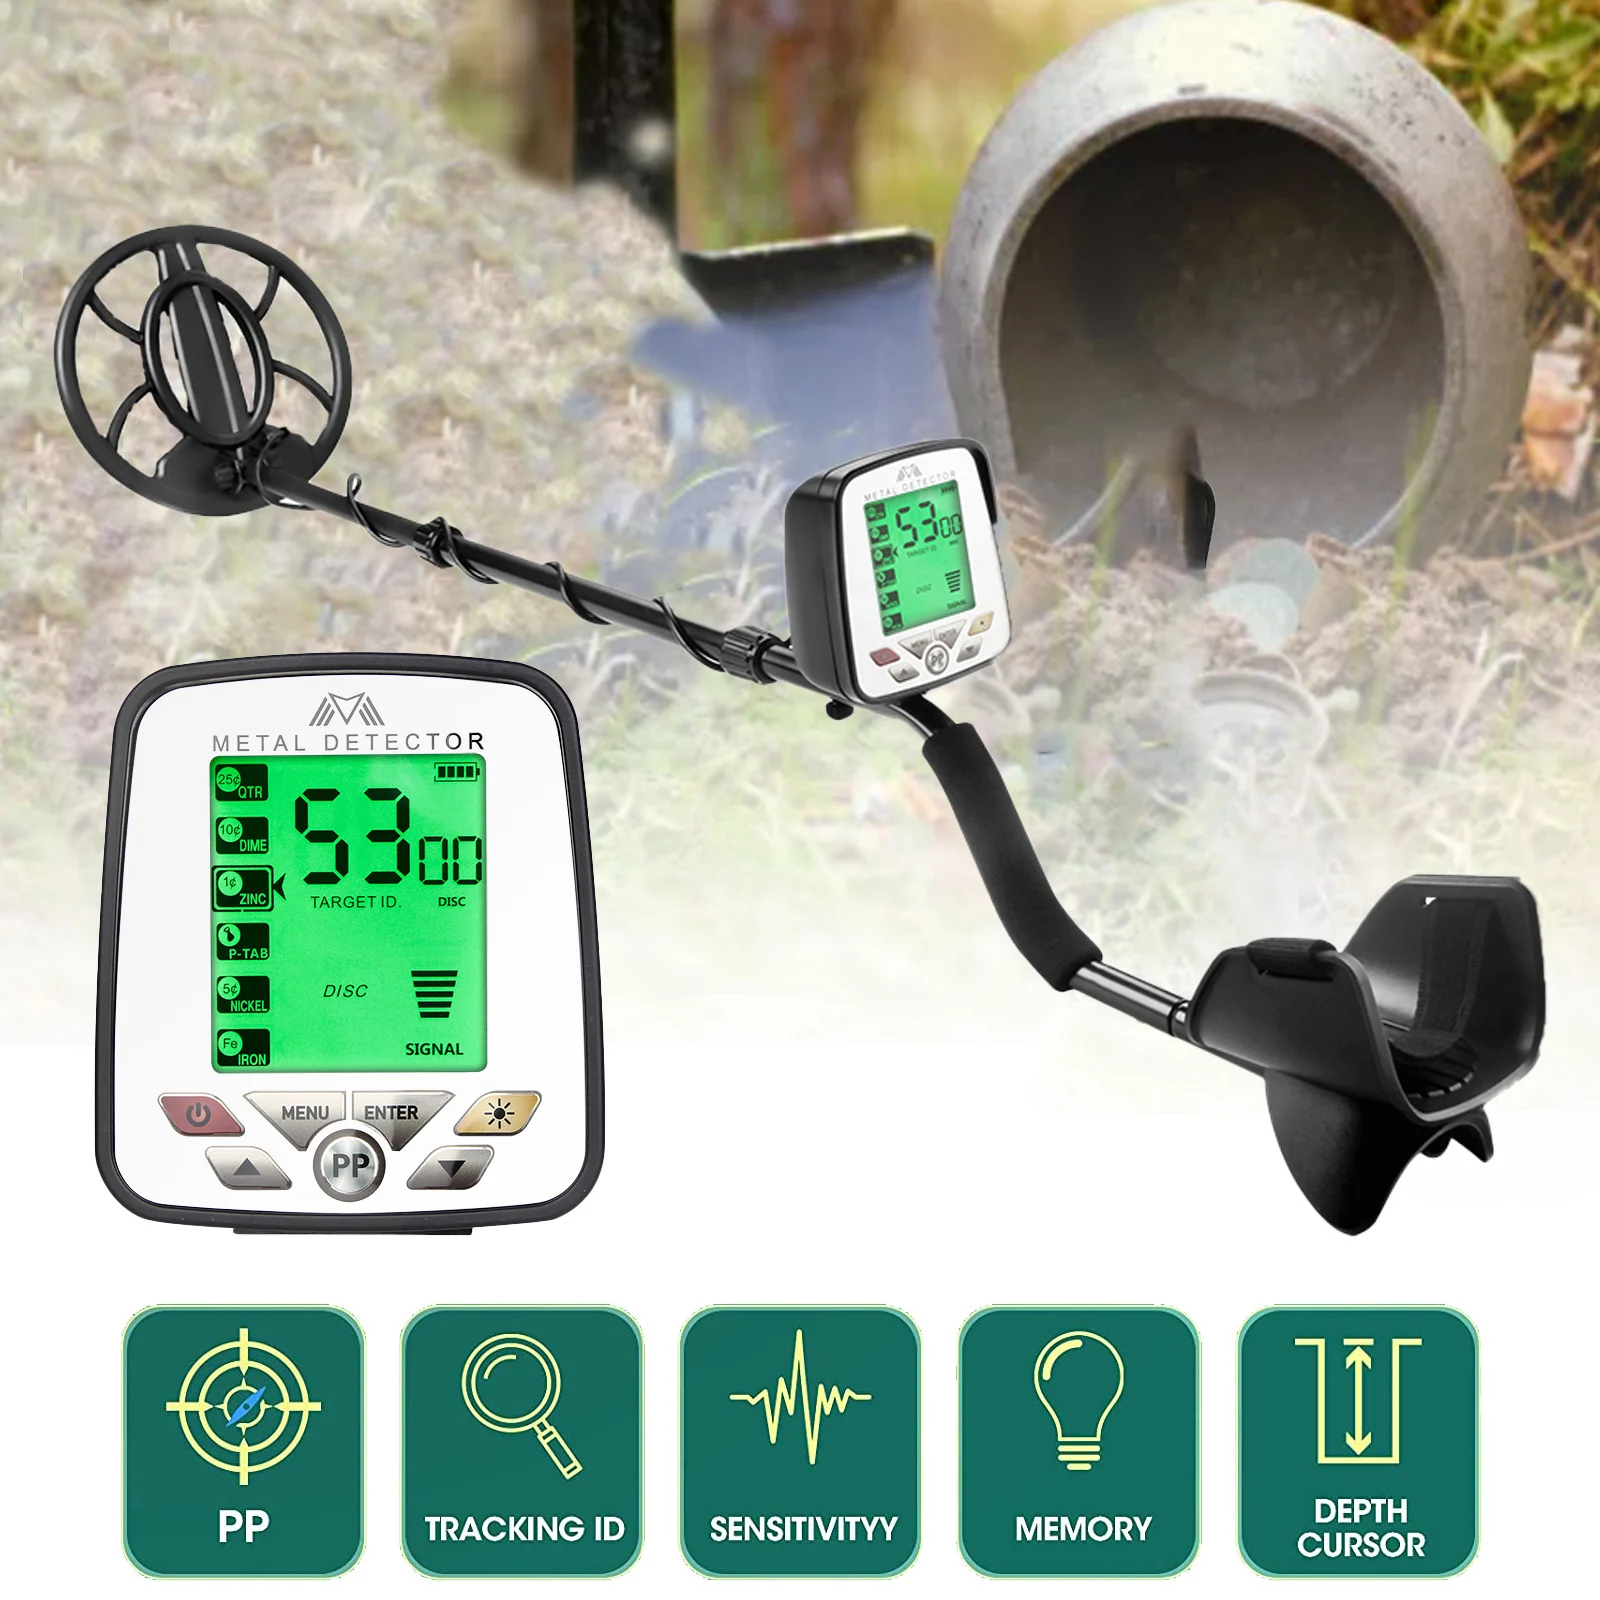 Newest Metal Detector MD 5032 Metal Detecting Pinpoint Waterproof Search Coil High Performance Underground Treasure Hunter